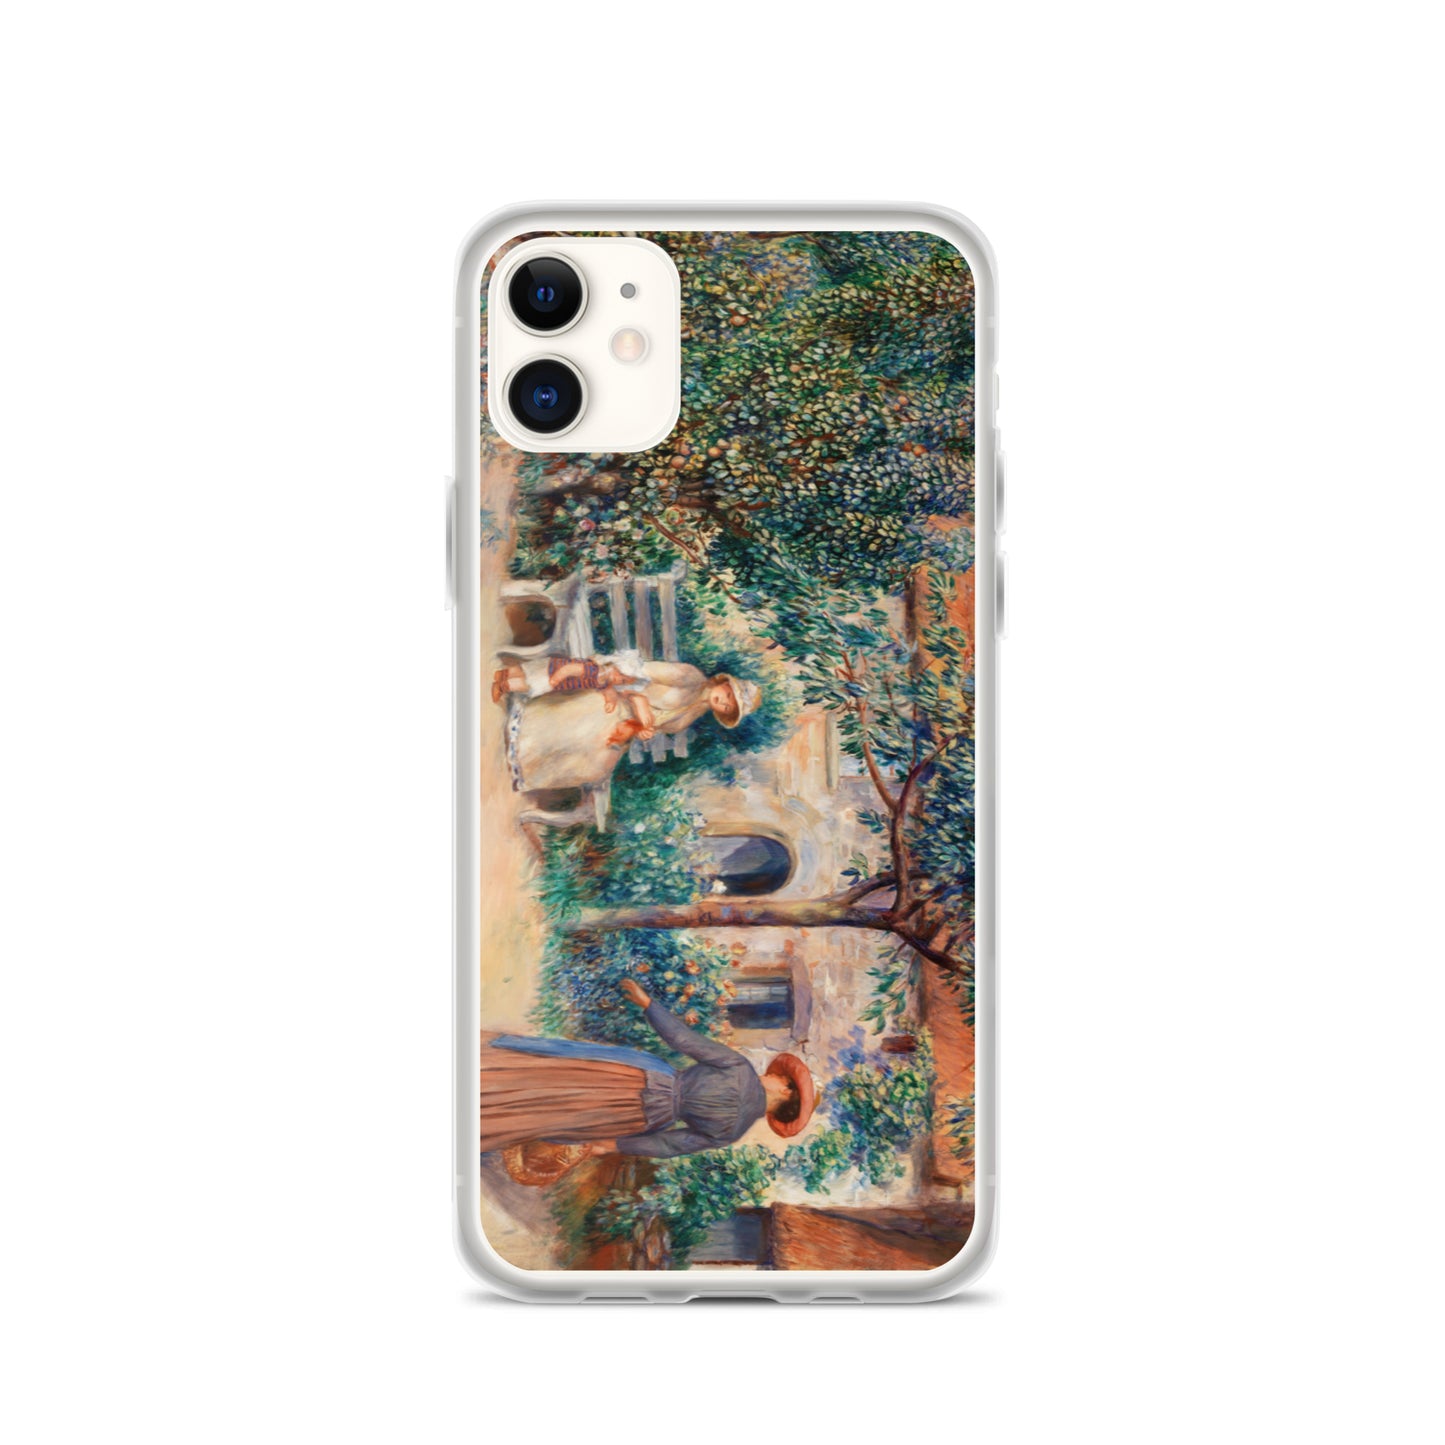 In Brittany iPhone Case